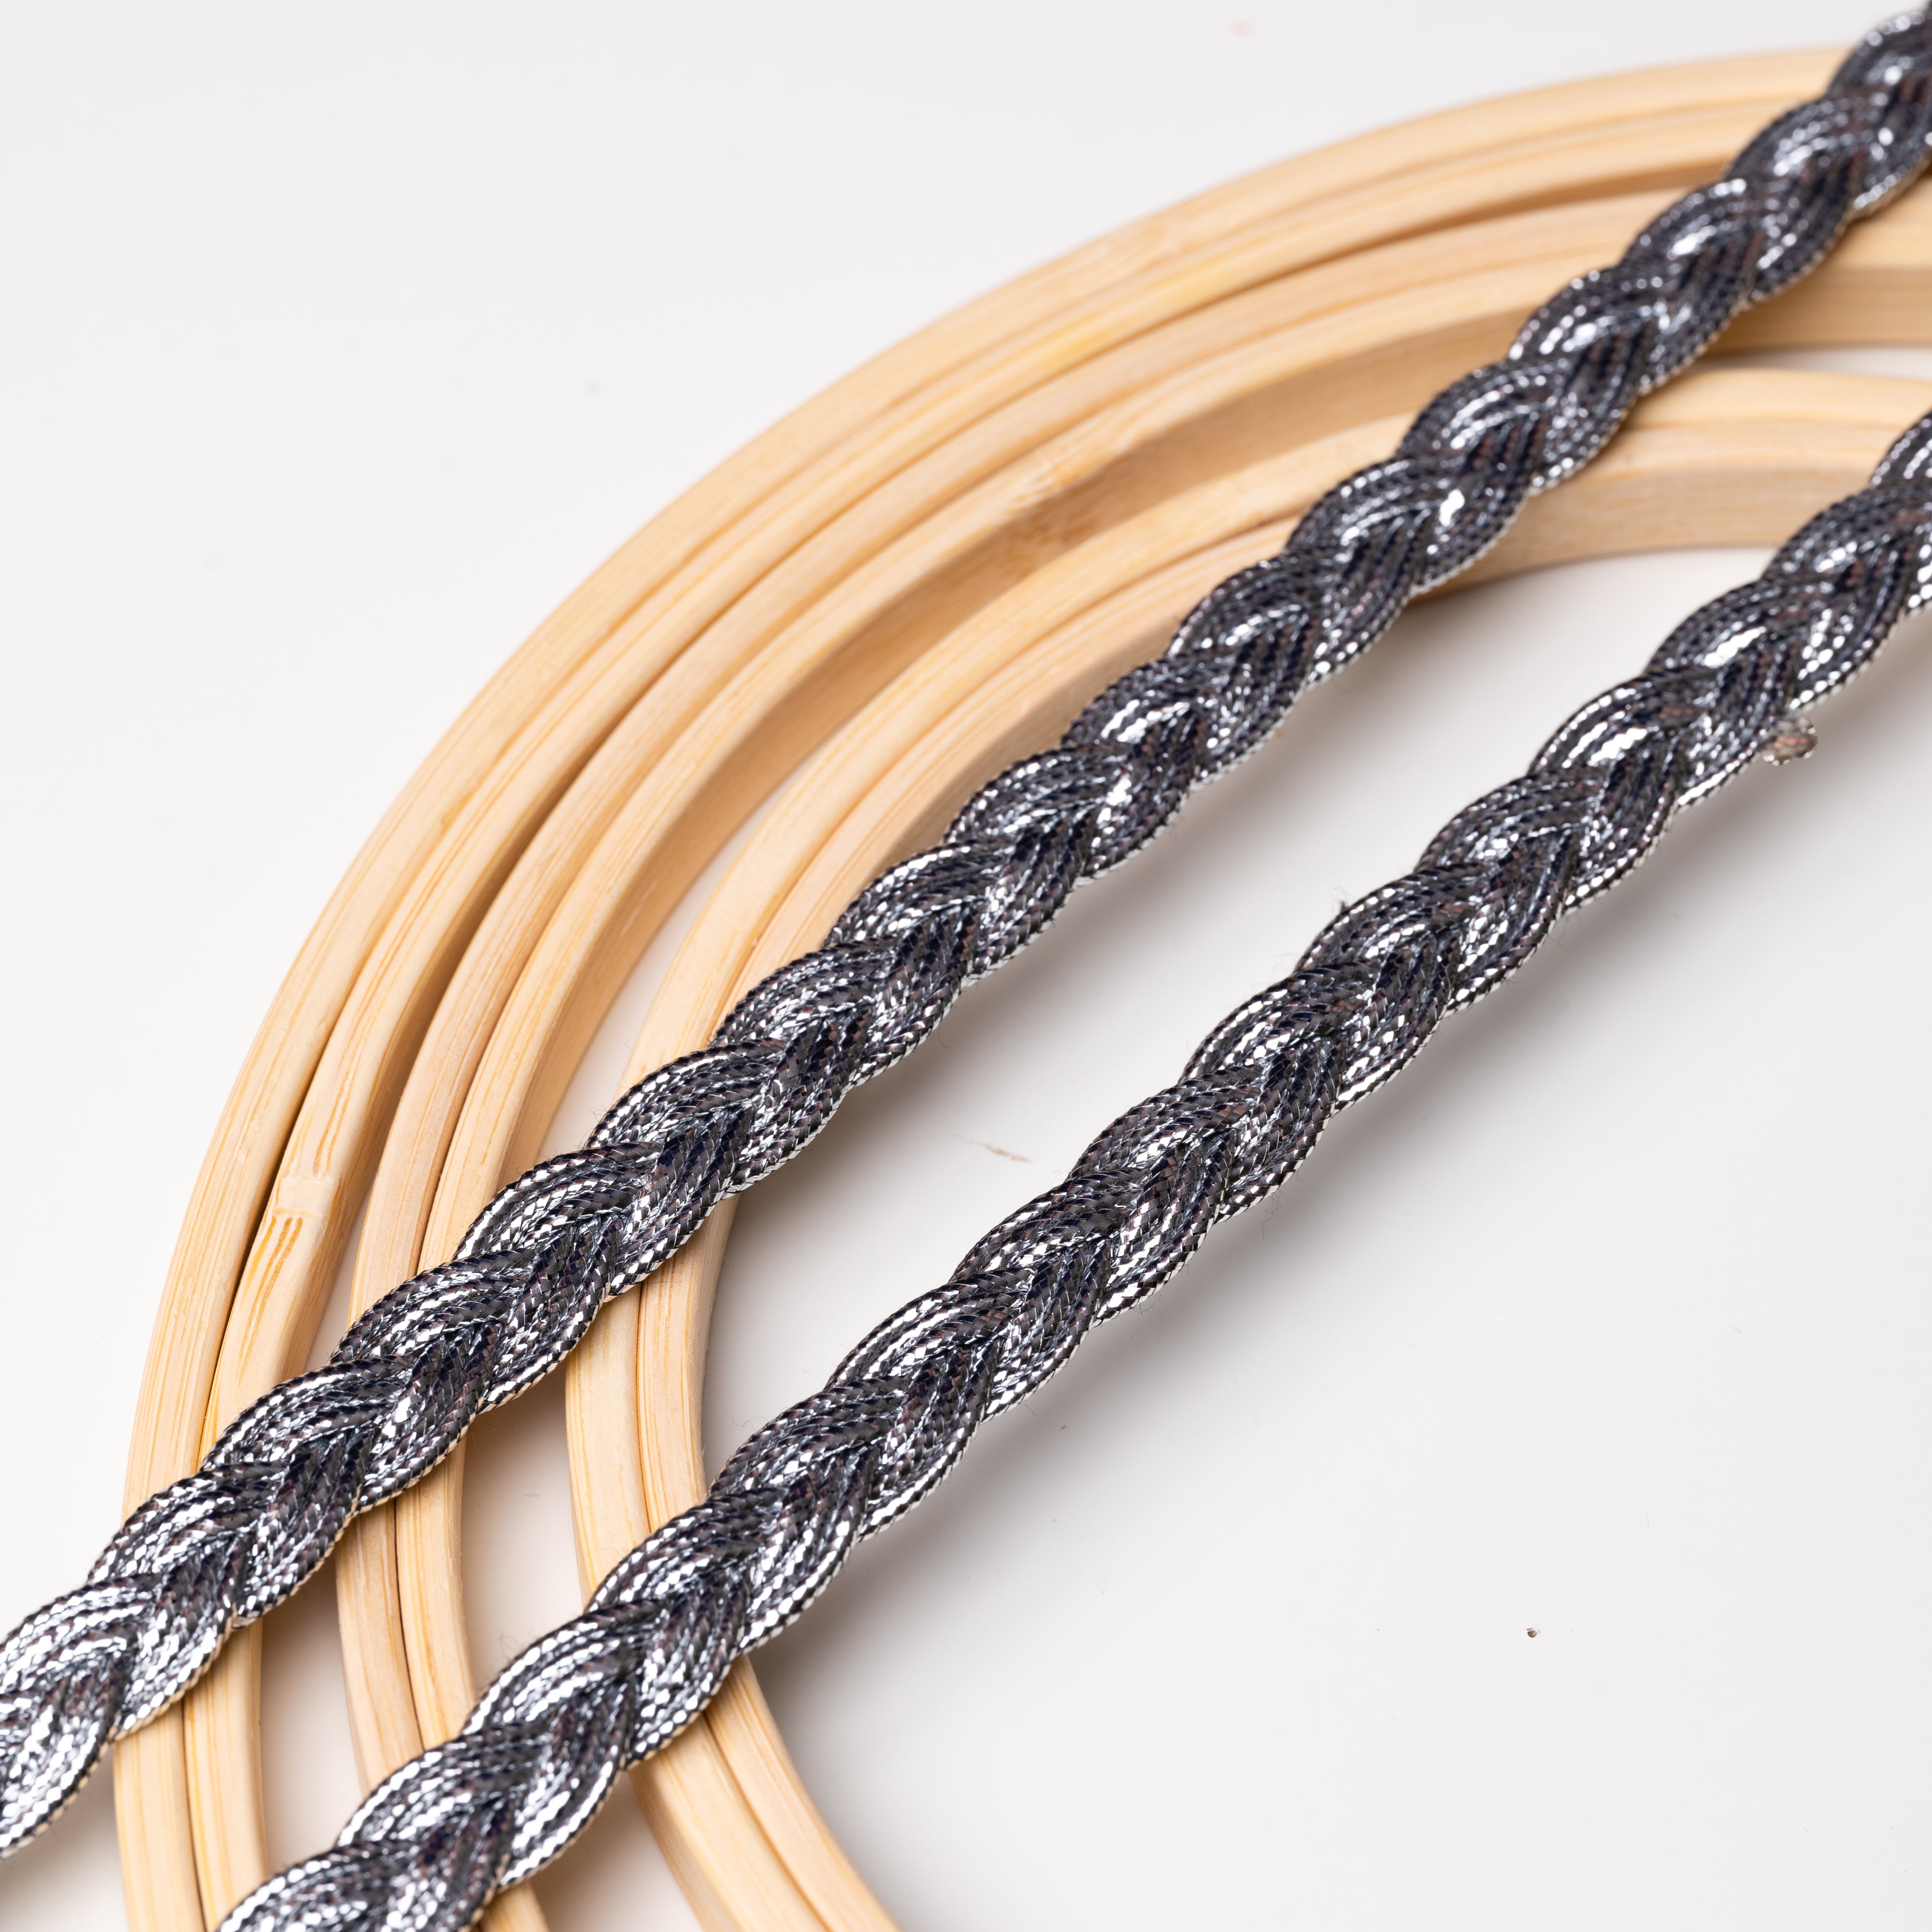 Silver metallic trim in a braided pattern laying flat across wooden embroidery rings.